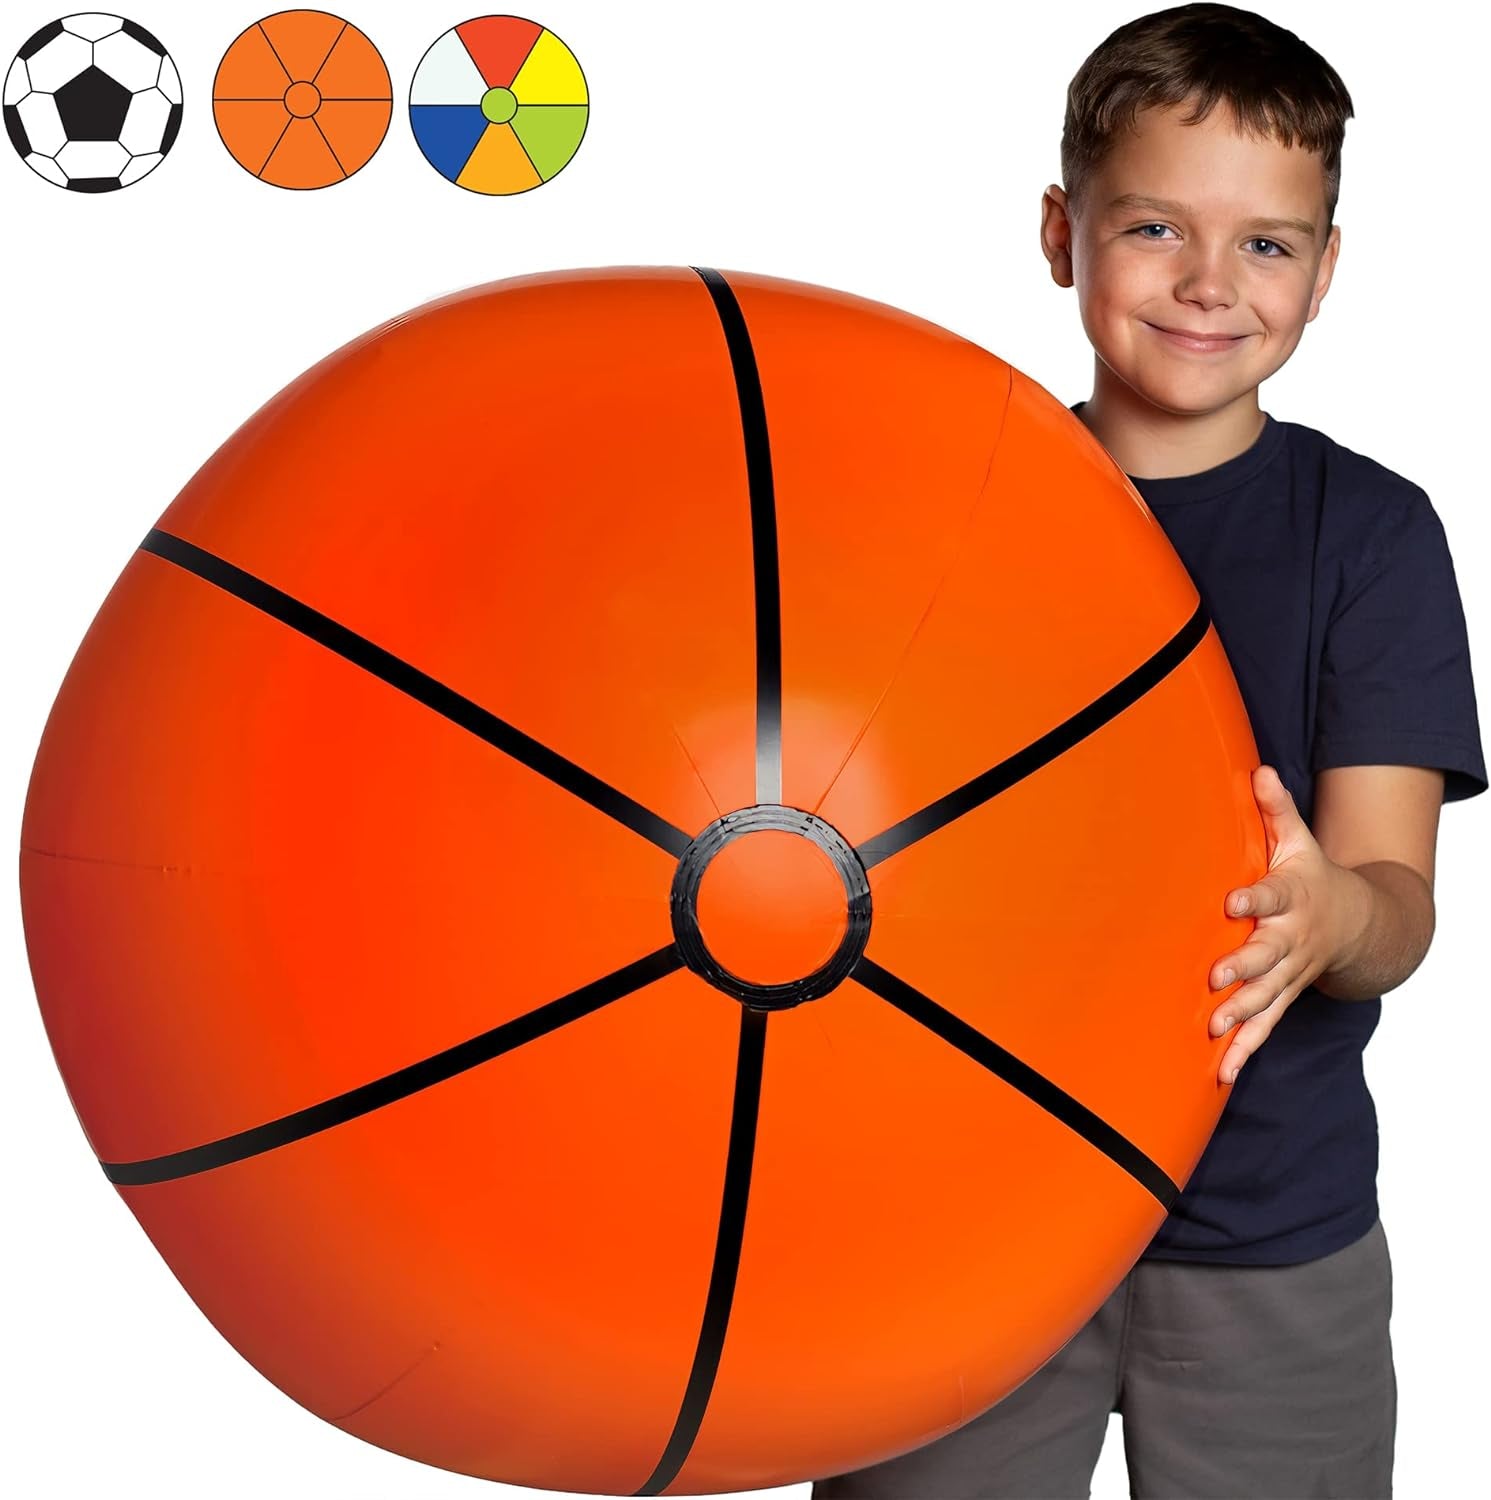 Large Beach Ball for Kids or Adults - Easy to Inflate and Durable Material to Last for Years of Fun - Comes in 3 Colors - Great Gift Idea for Boys & Girls All Ages - Also Best Pool Party Decoration Toy